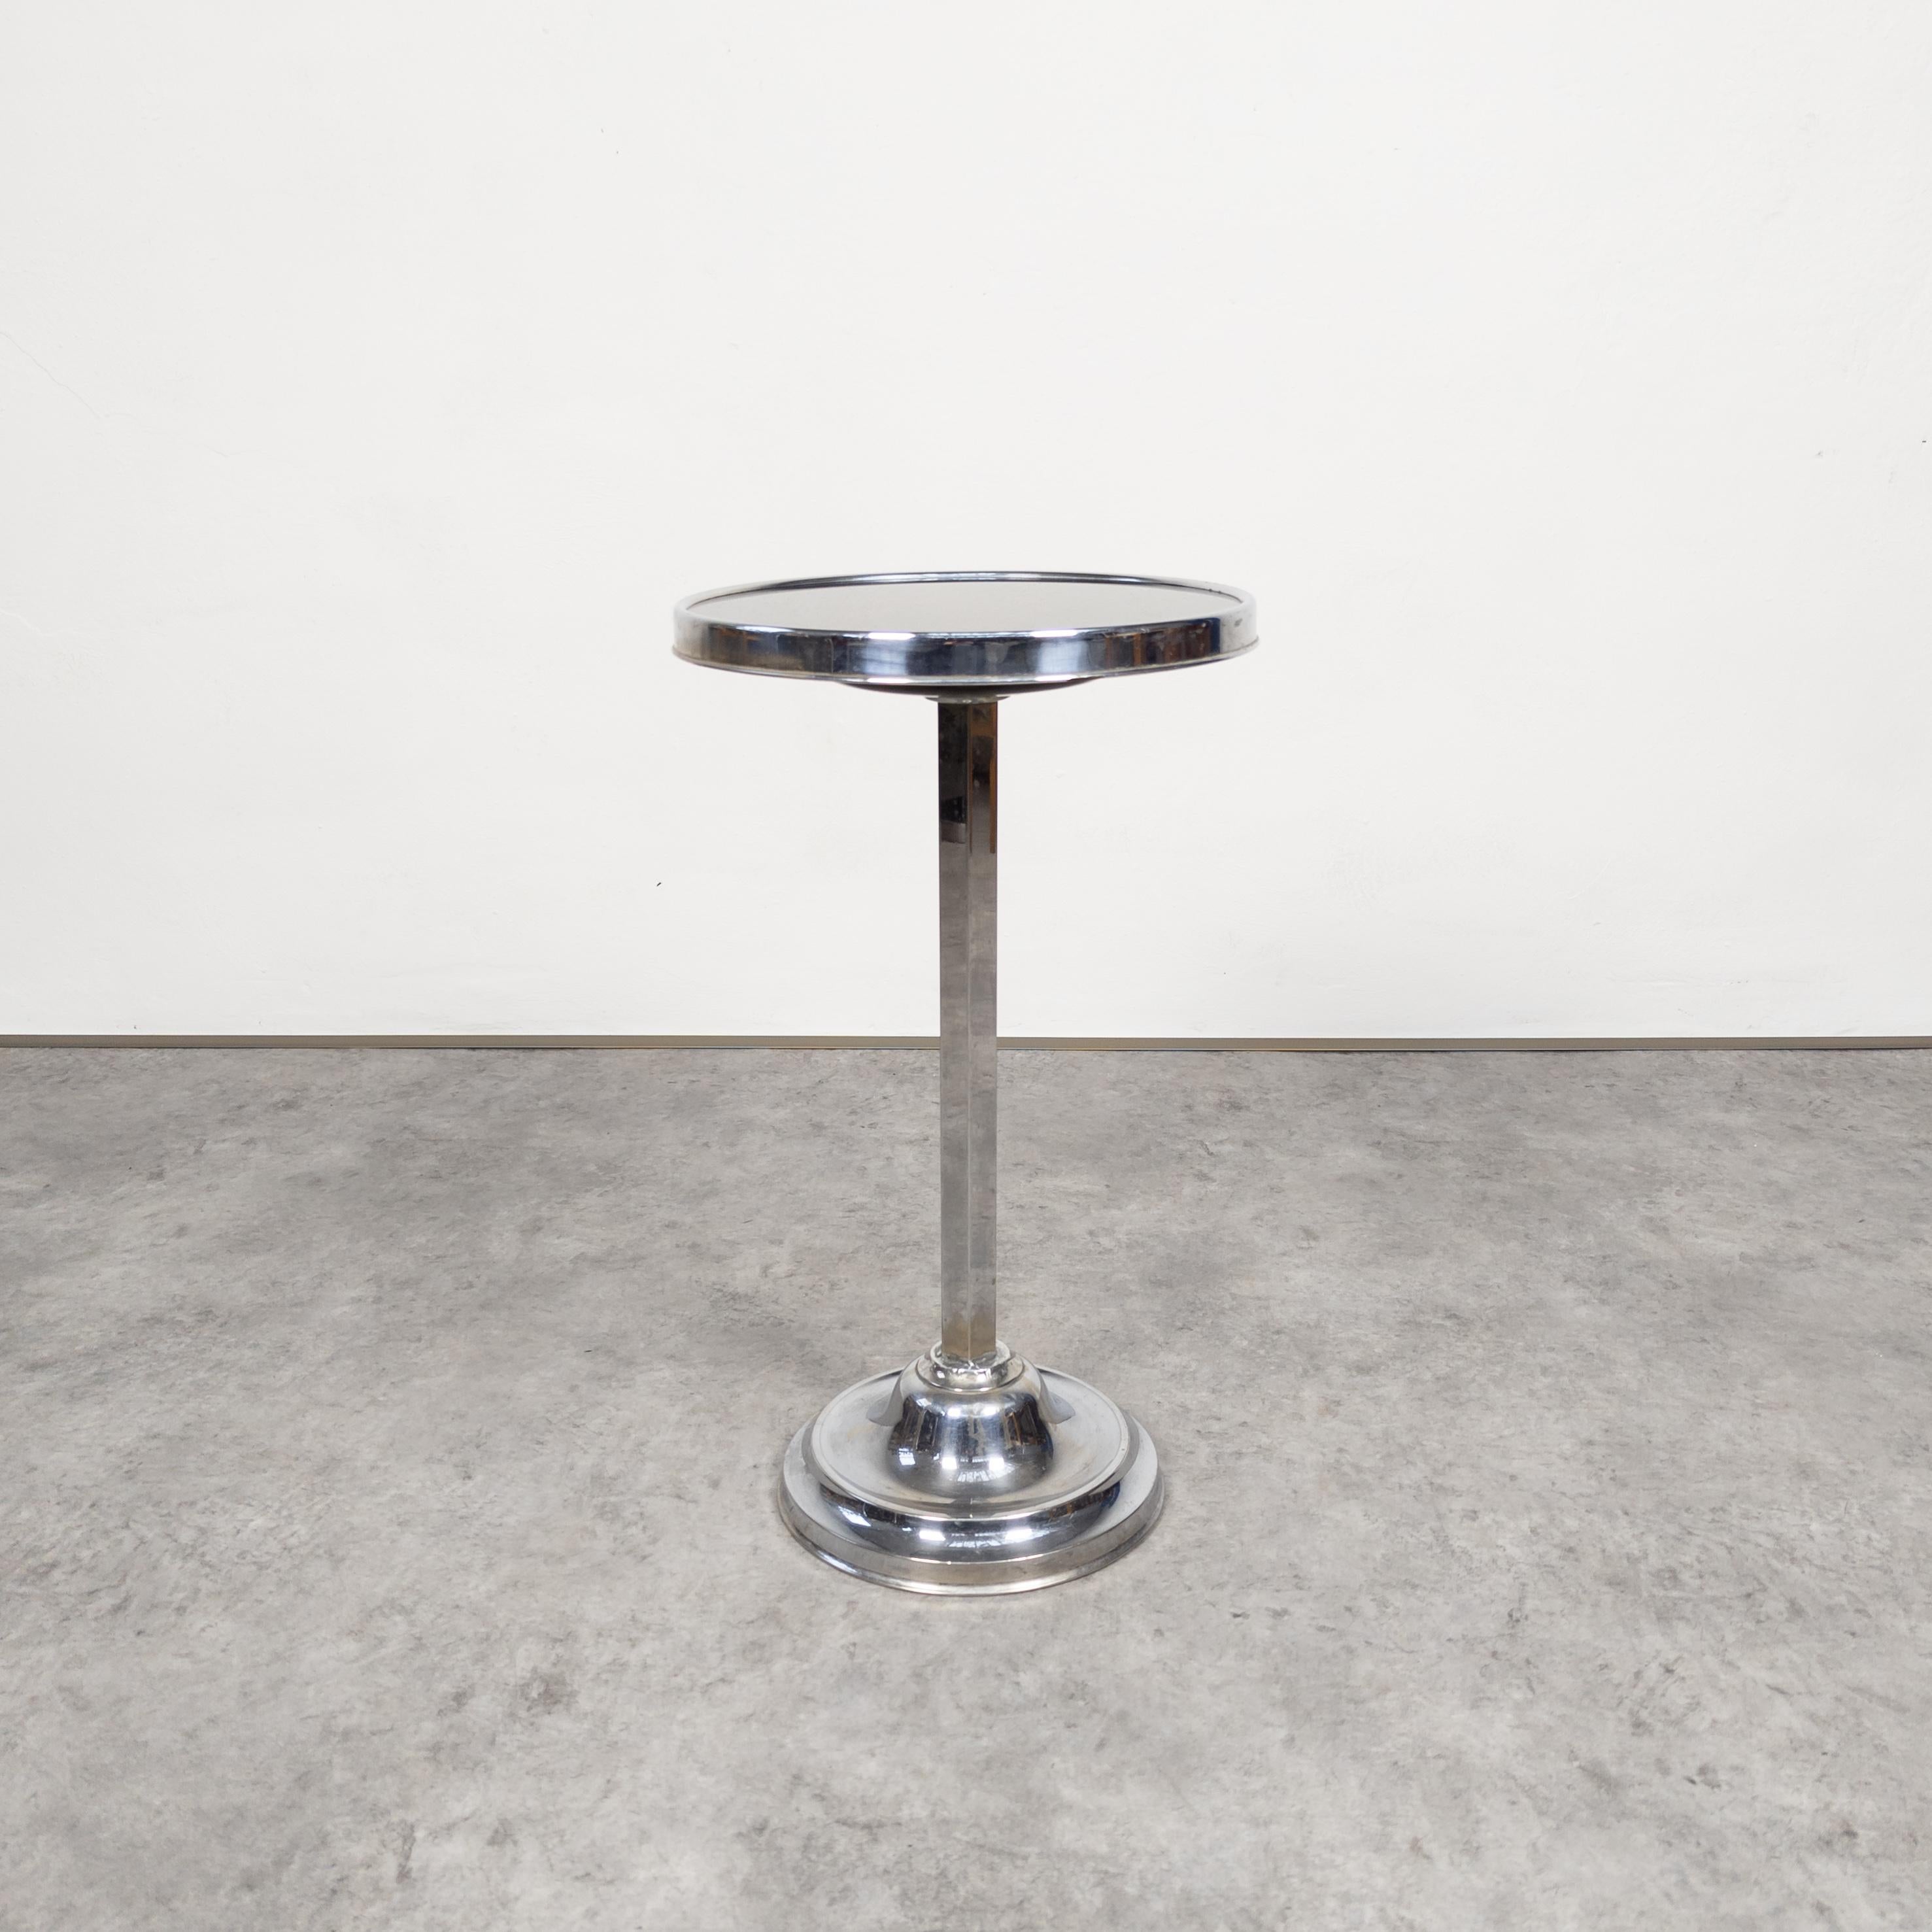 Smokers or side table manufactured by Gebrüder Mäher company, Czechoslovakia in 1930's. Chrome plated steel, opaline glass. In good vintage condition with some traces of wear and age. Height 58 cm, diameter 33 cm. Quite heavy for its size.